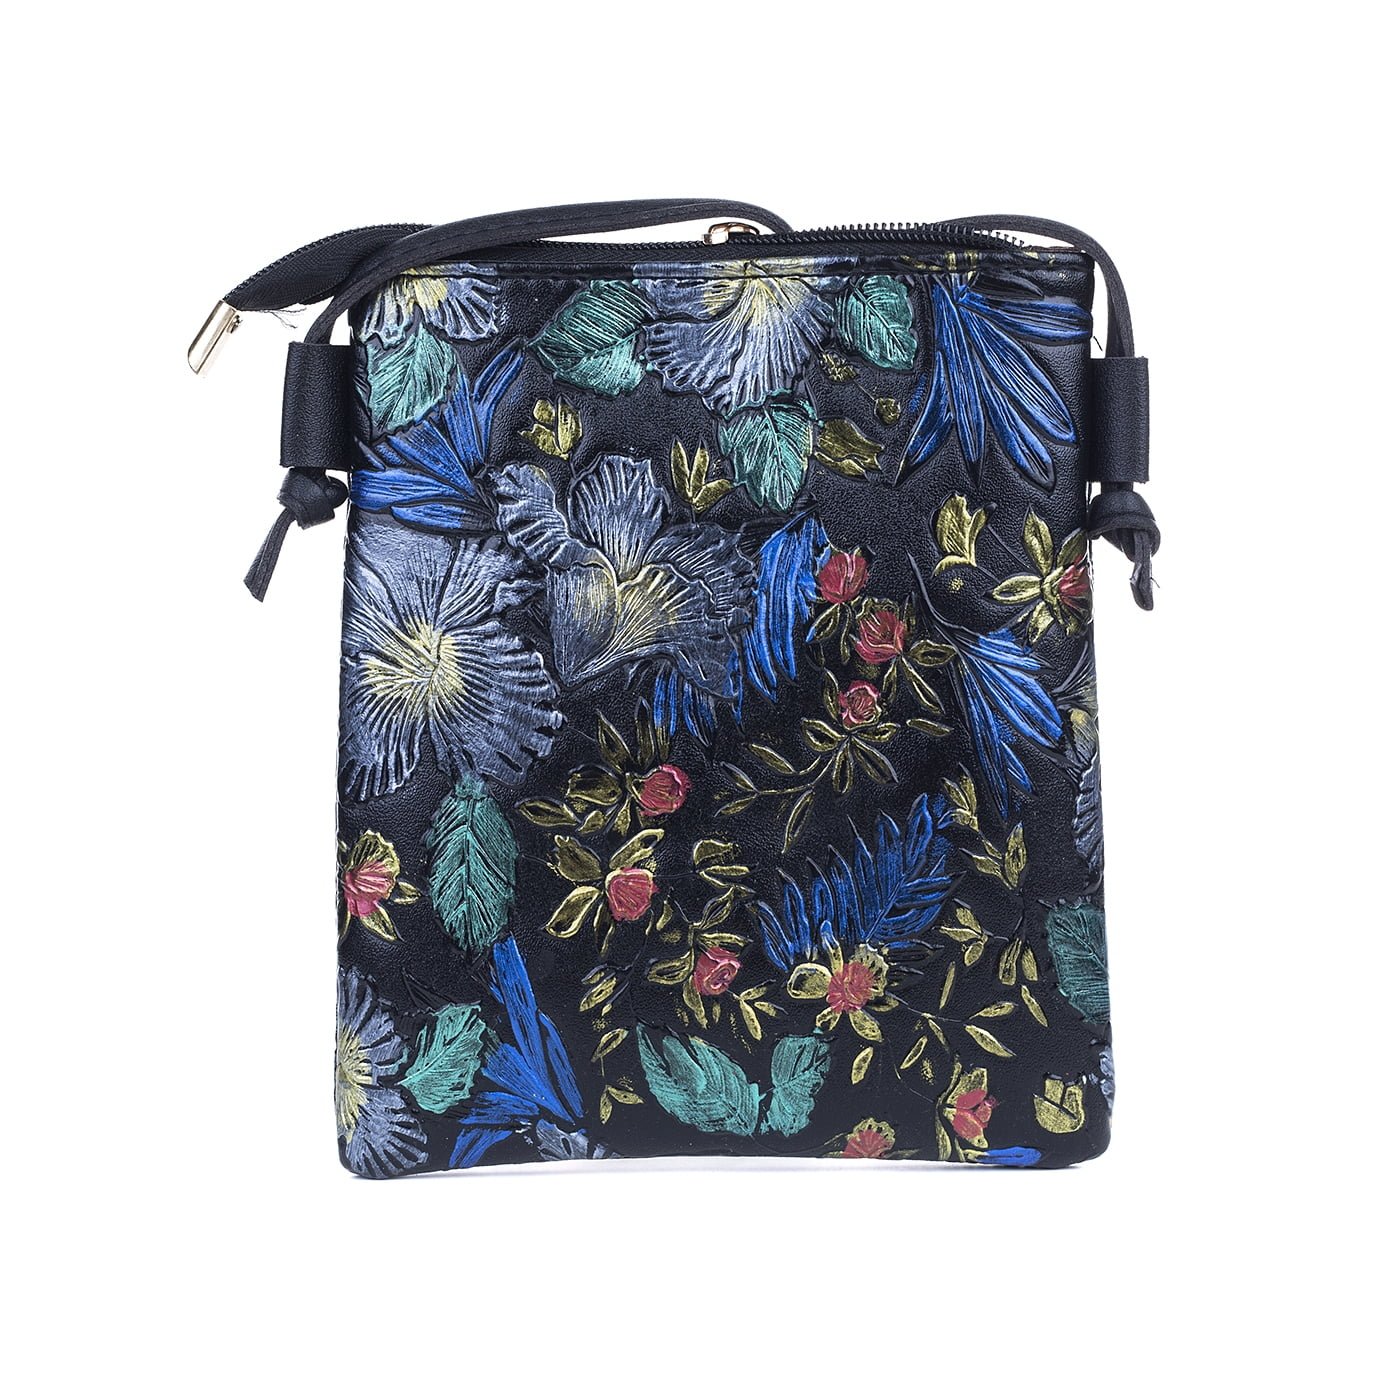 Teal/Black Embossed Floral Crossbody Bag - The Specialty House